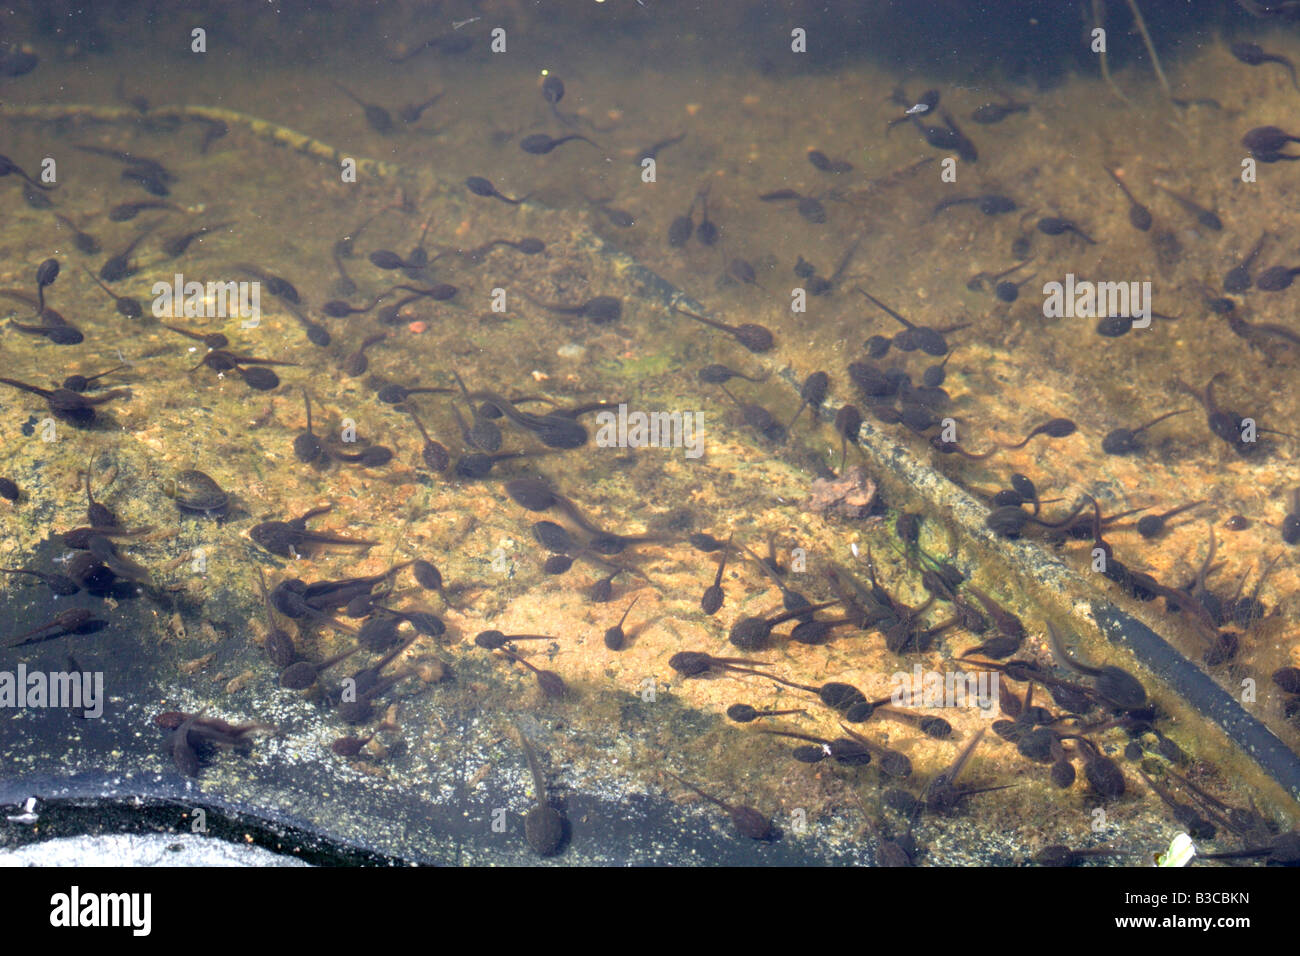 Masses of tadpoles in a UK pond Stock Photo